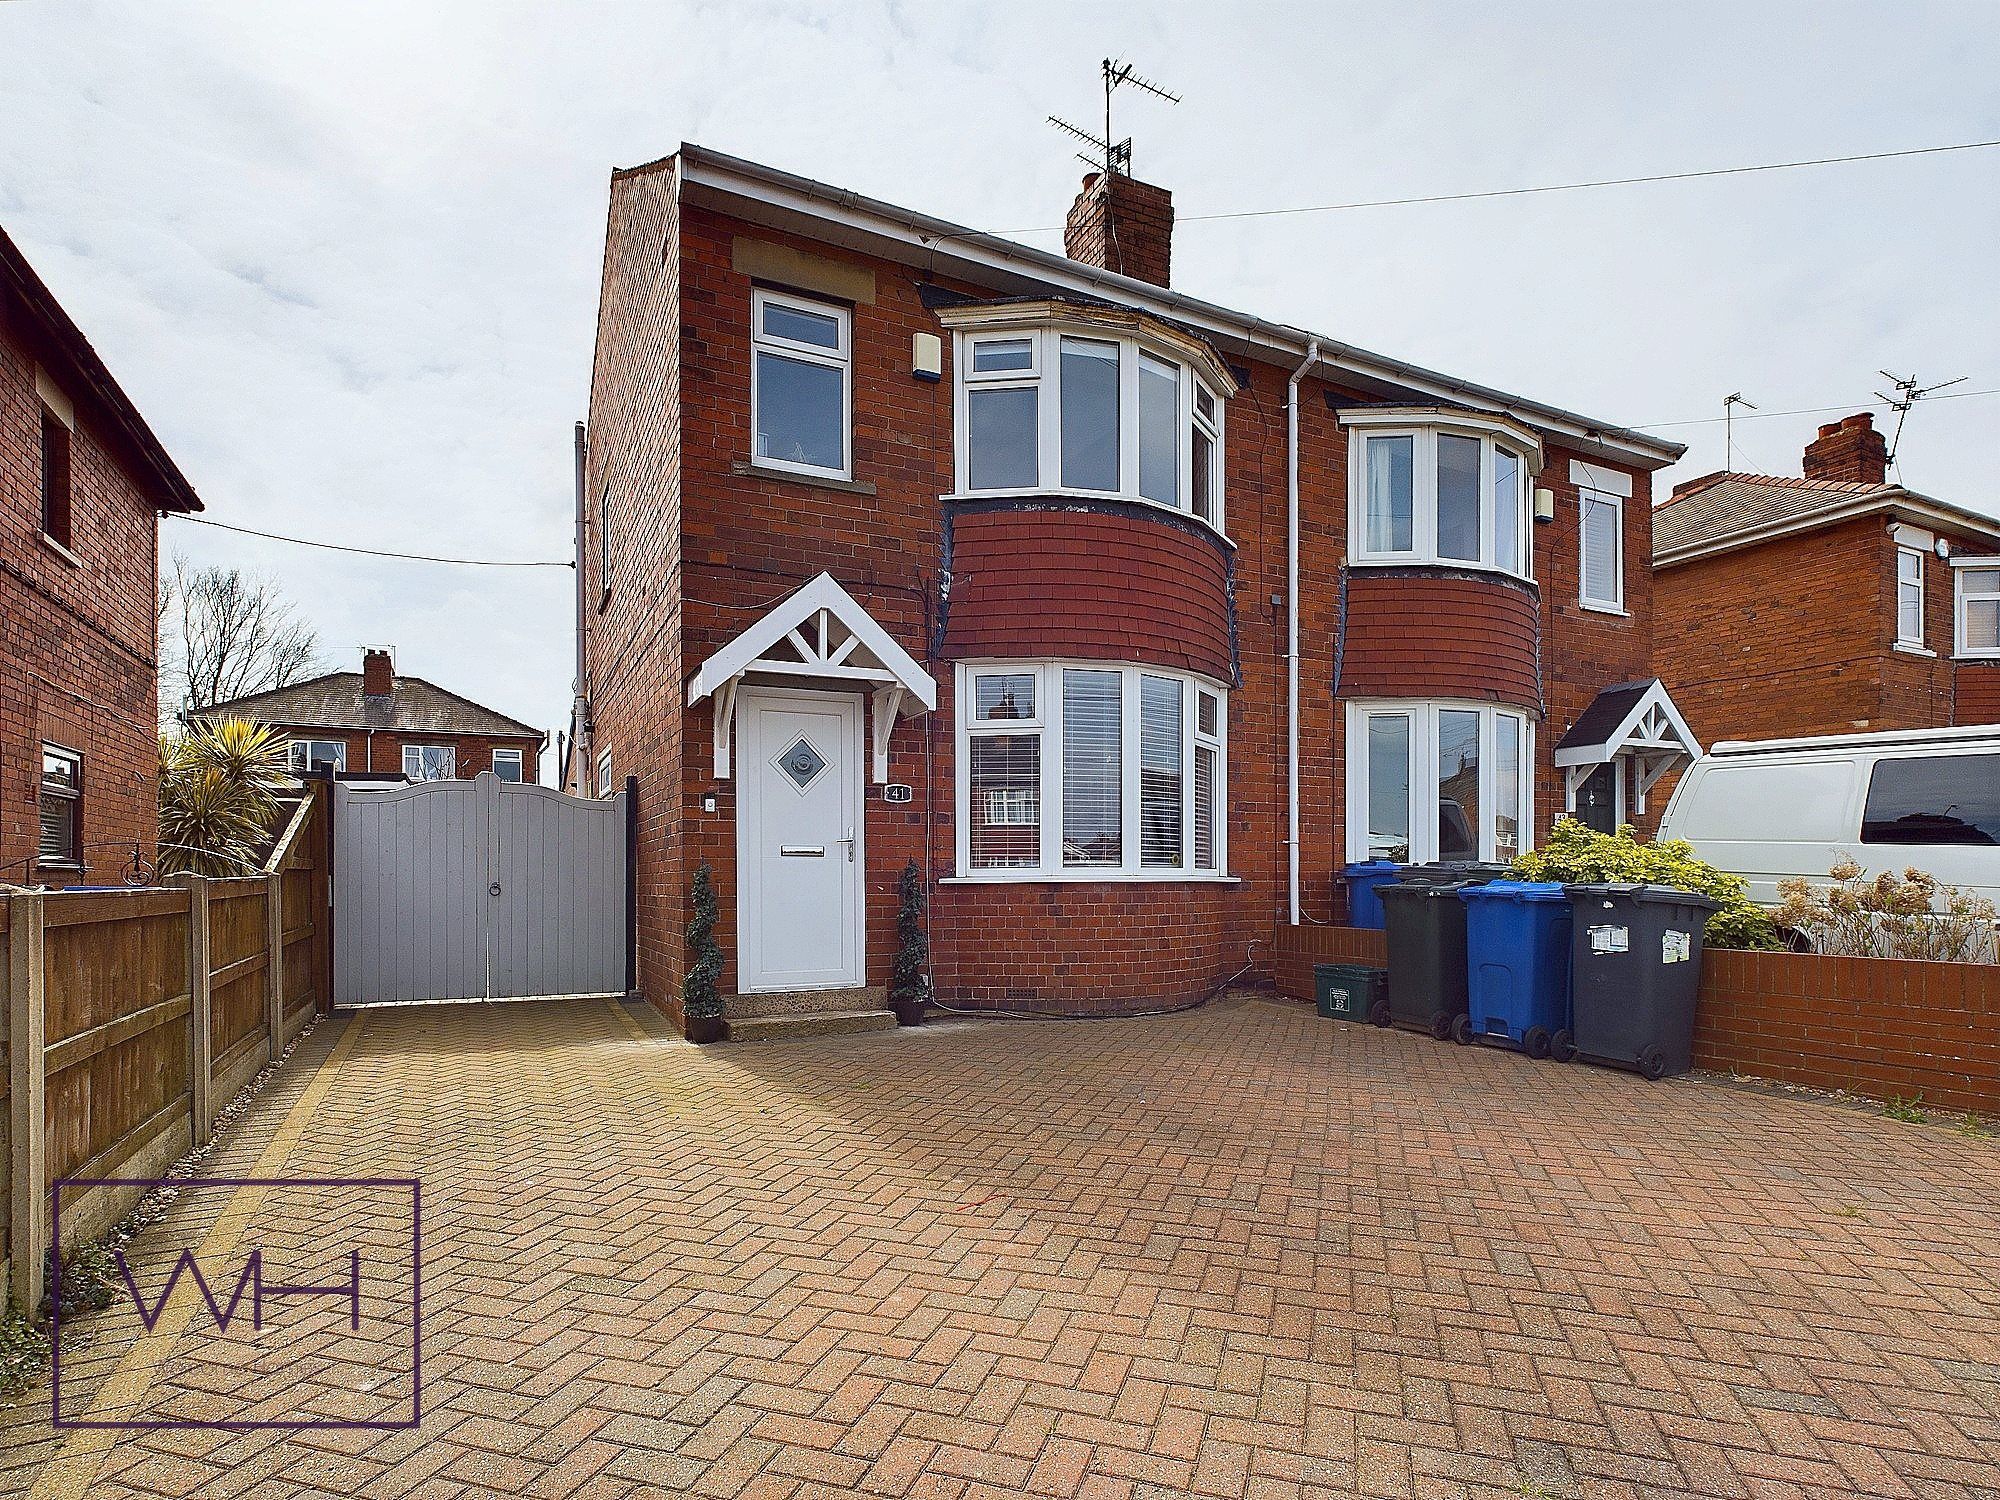 Richmond Road, Scawsby, Doncaster, DN5 8SX